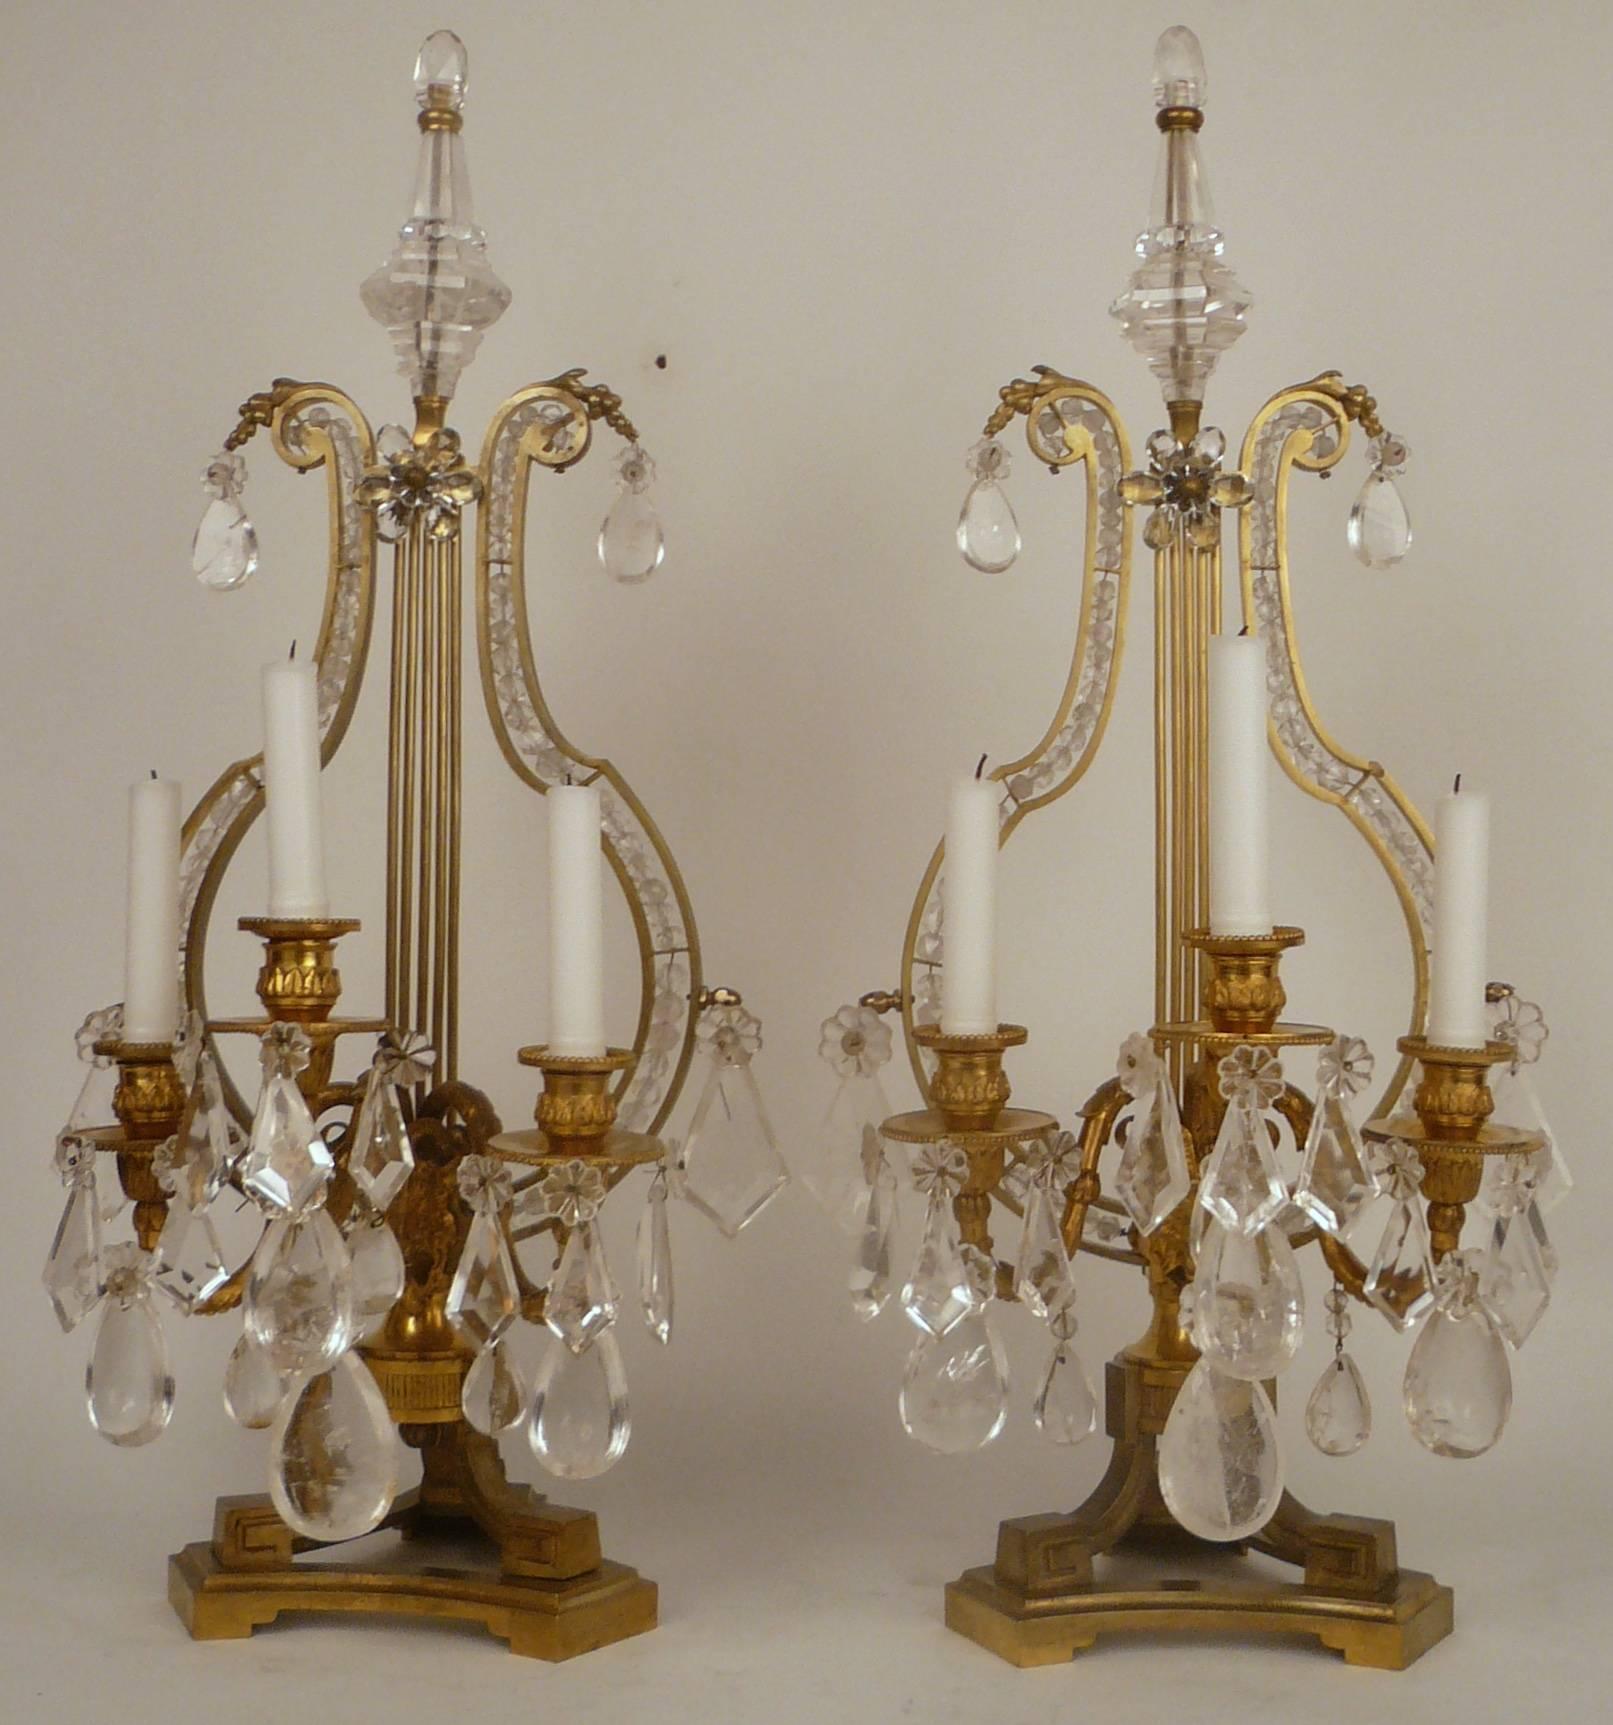 Faceted Pair of 19th Century, Louis XVI Style Gilt Bronze and Rock Crystal Candelabra